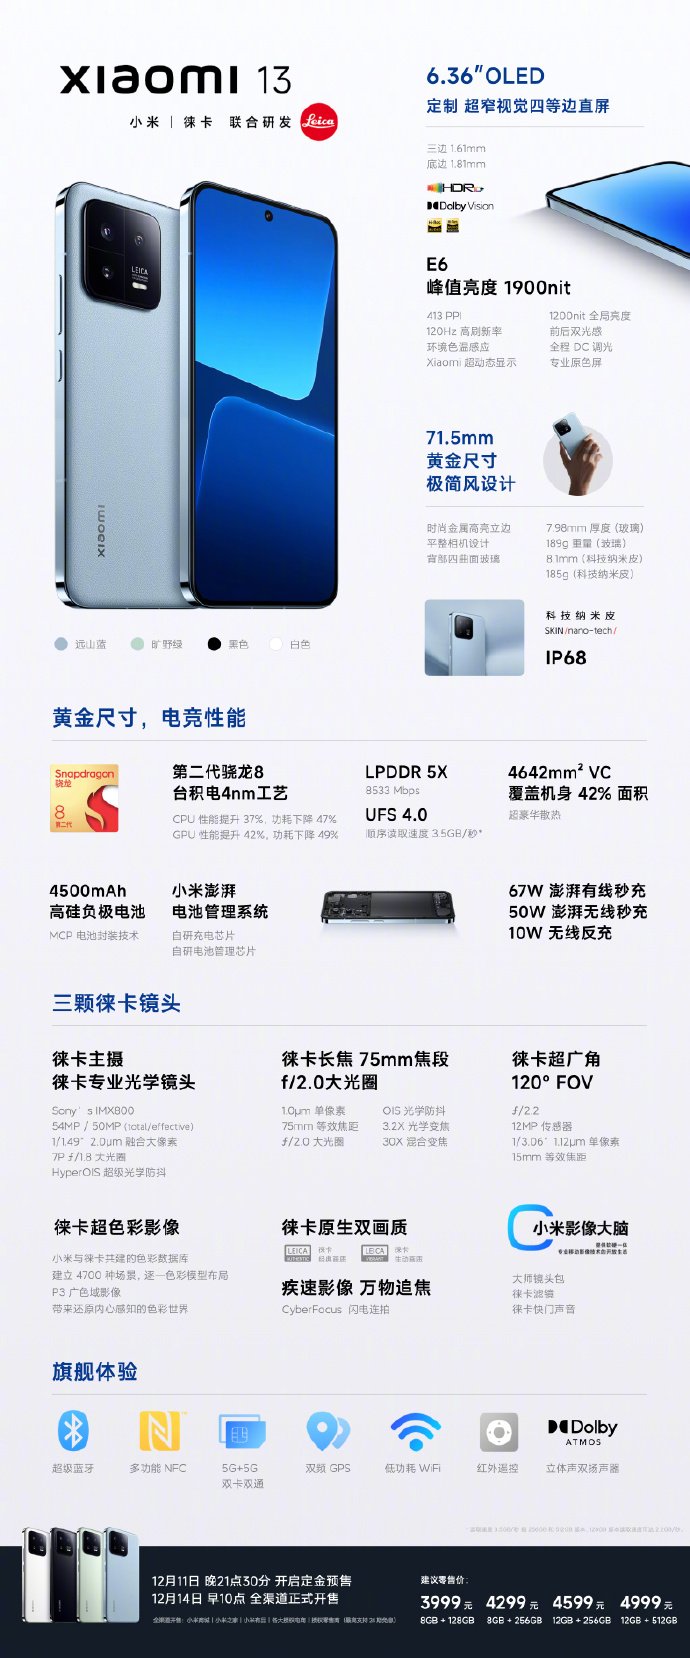 Mukul Sharma on X: Xiaomi 13 full specifications. Price starts at Yuan  3,999 (around ₹47,371 if directly converted) #Xiaomi #Xiaomi13  #Xiaomi13series  / X